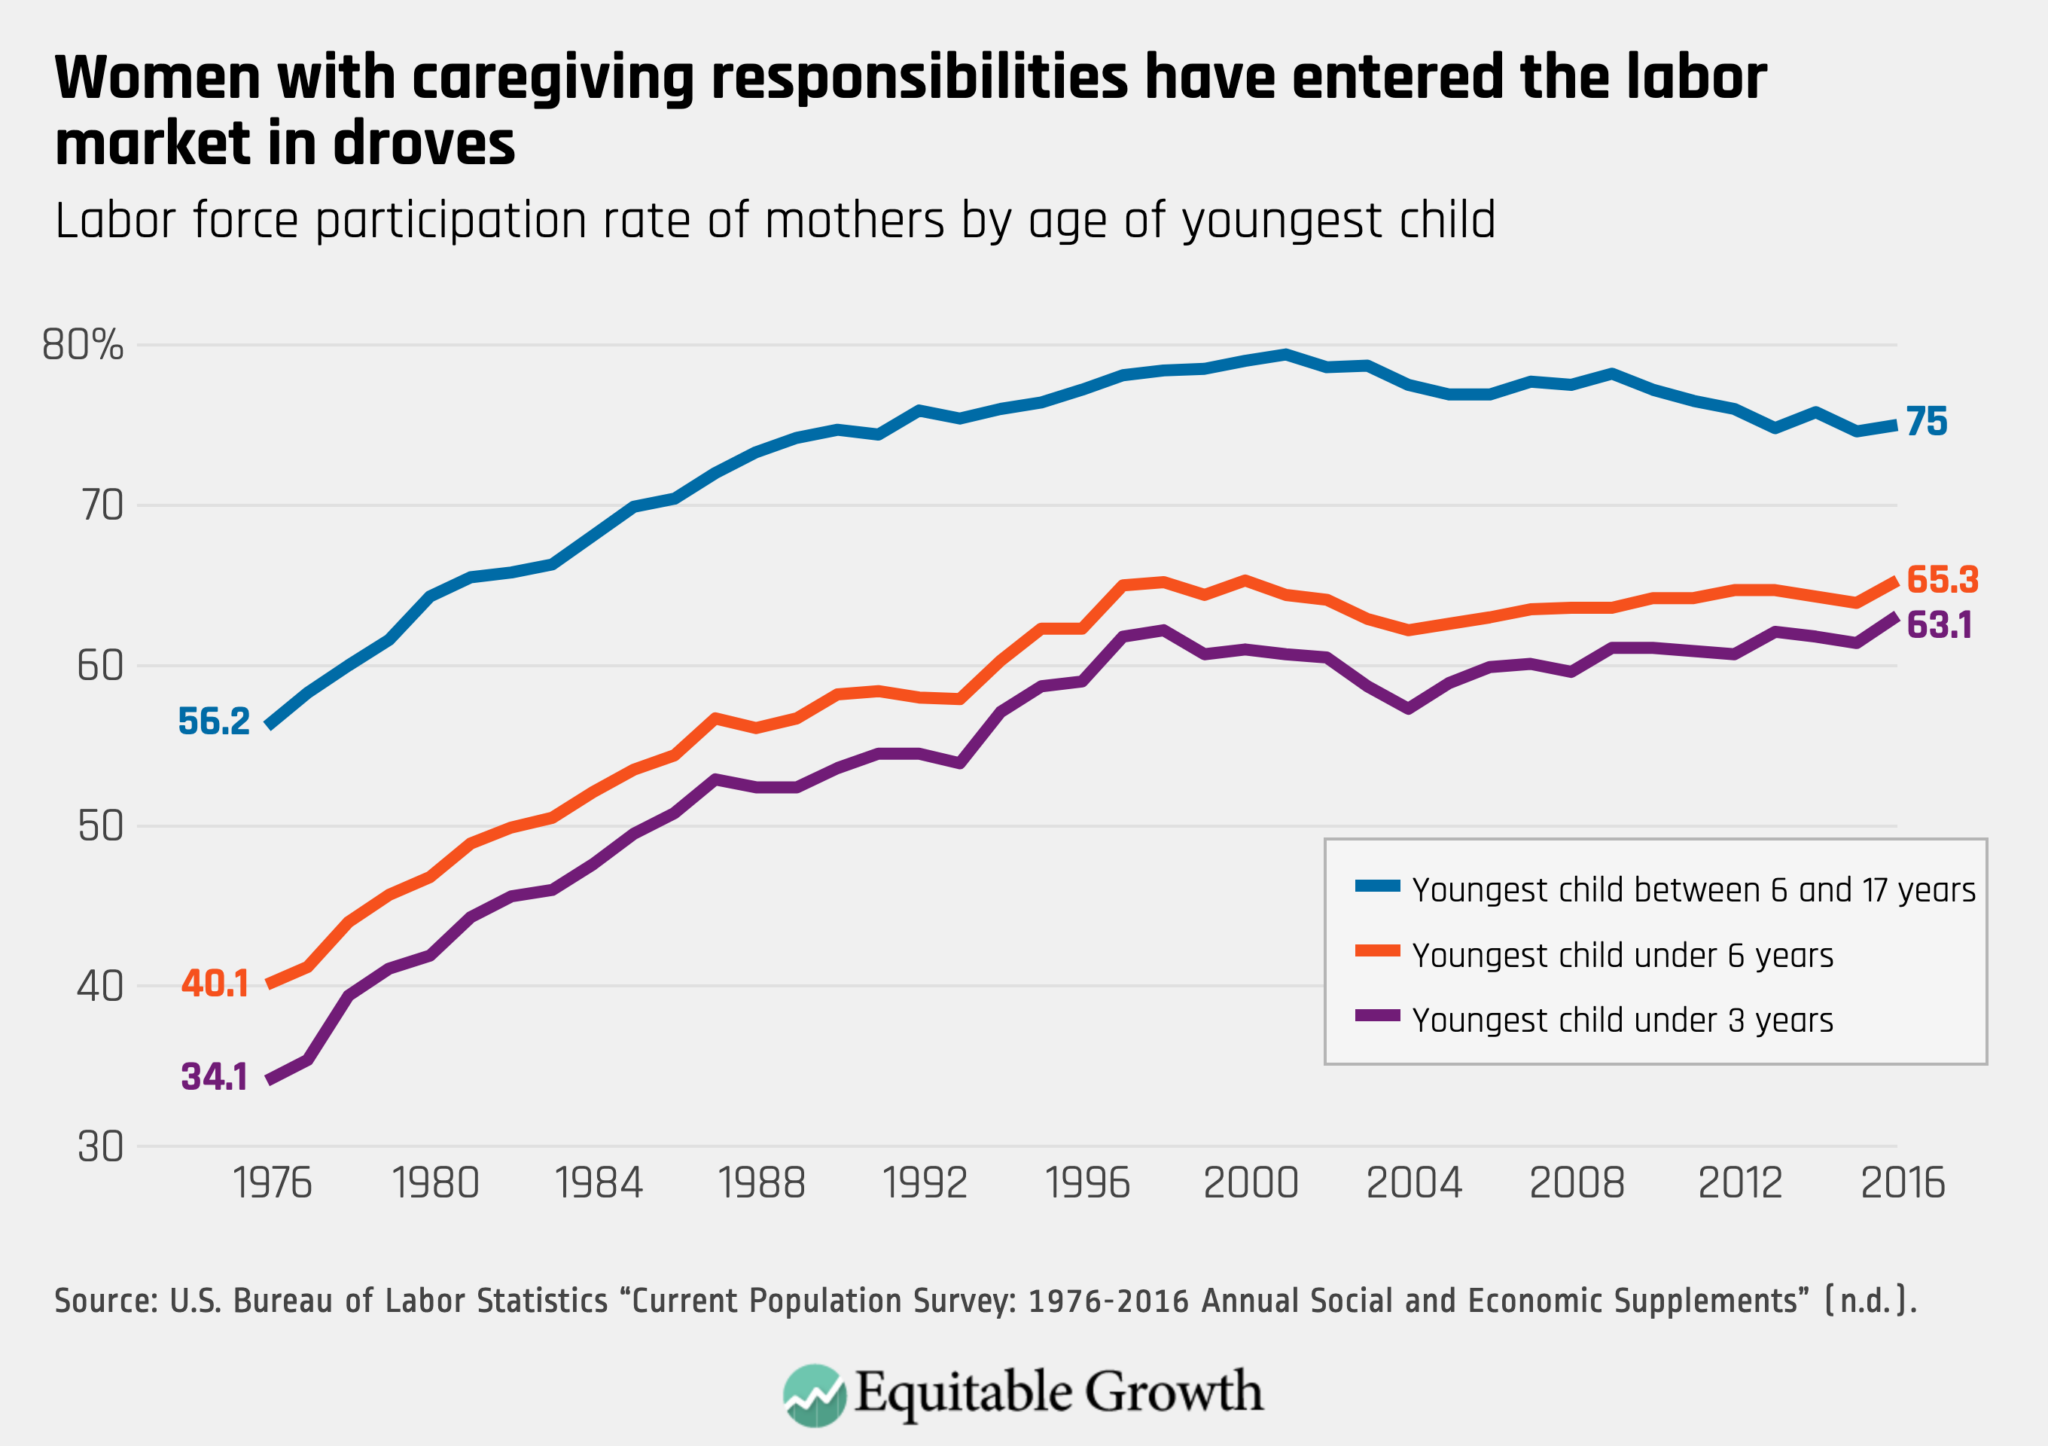 Labor force participation rate of mothers by age of youngest child